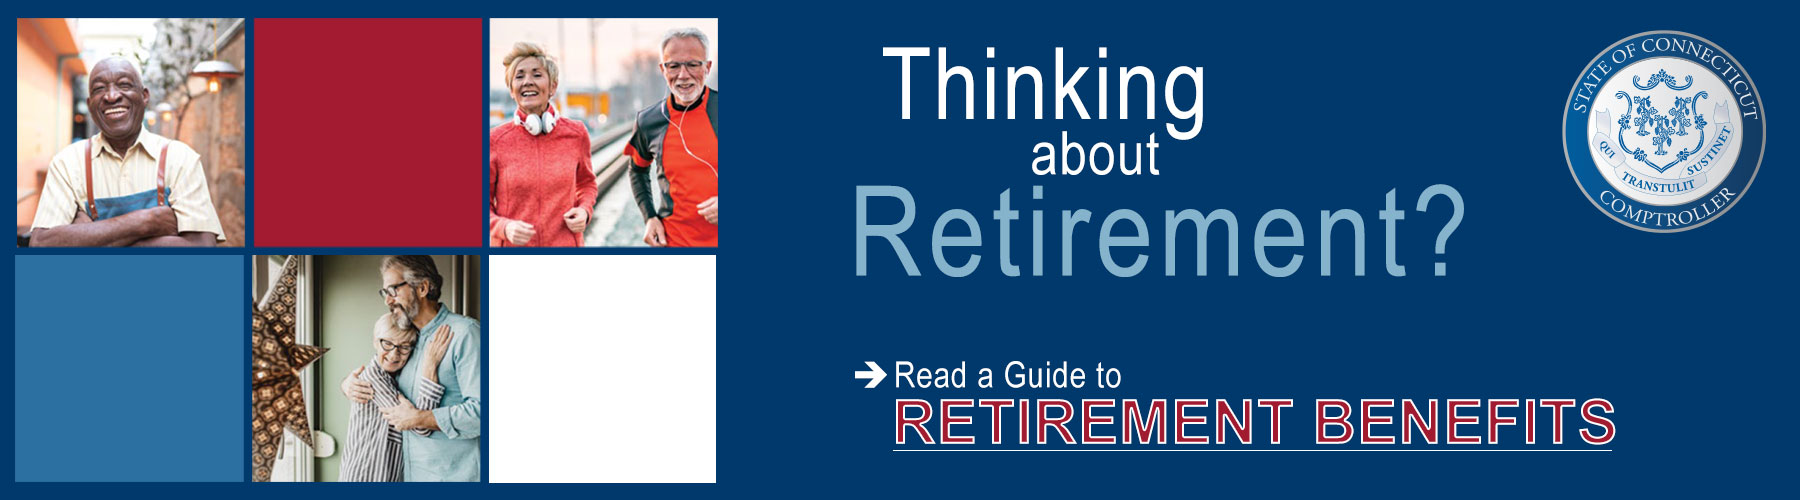 Guide to Retirement Benefits